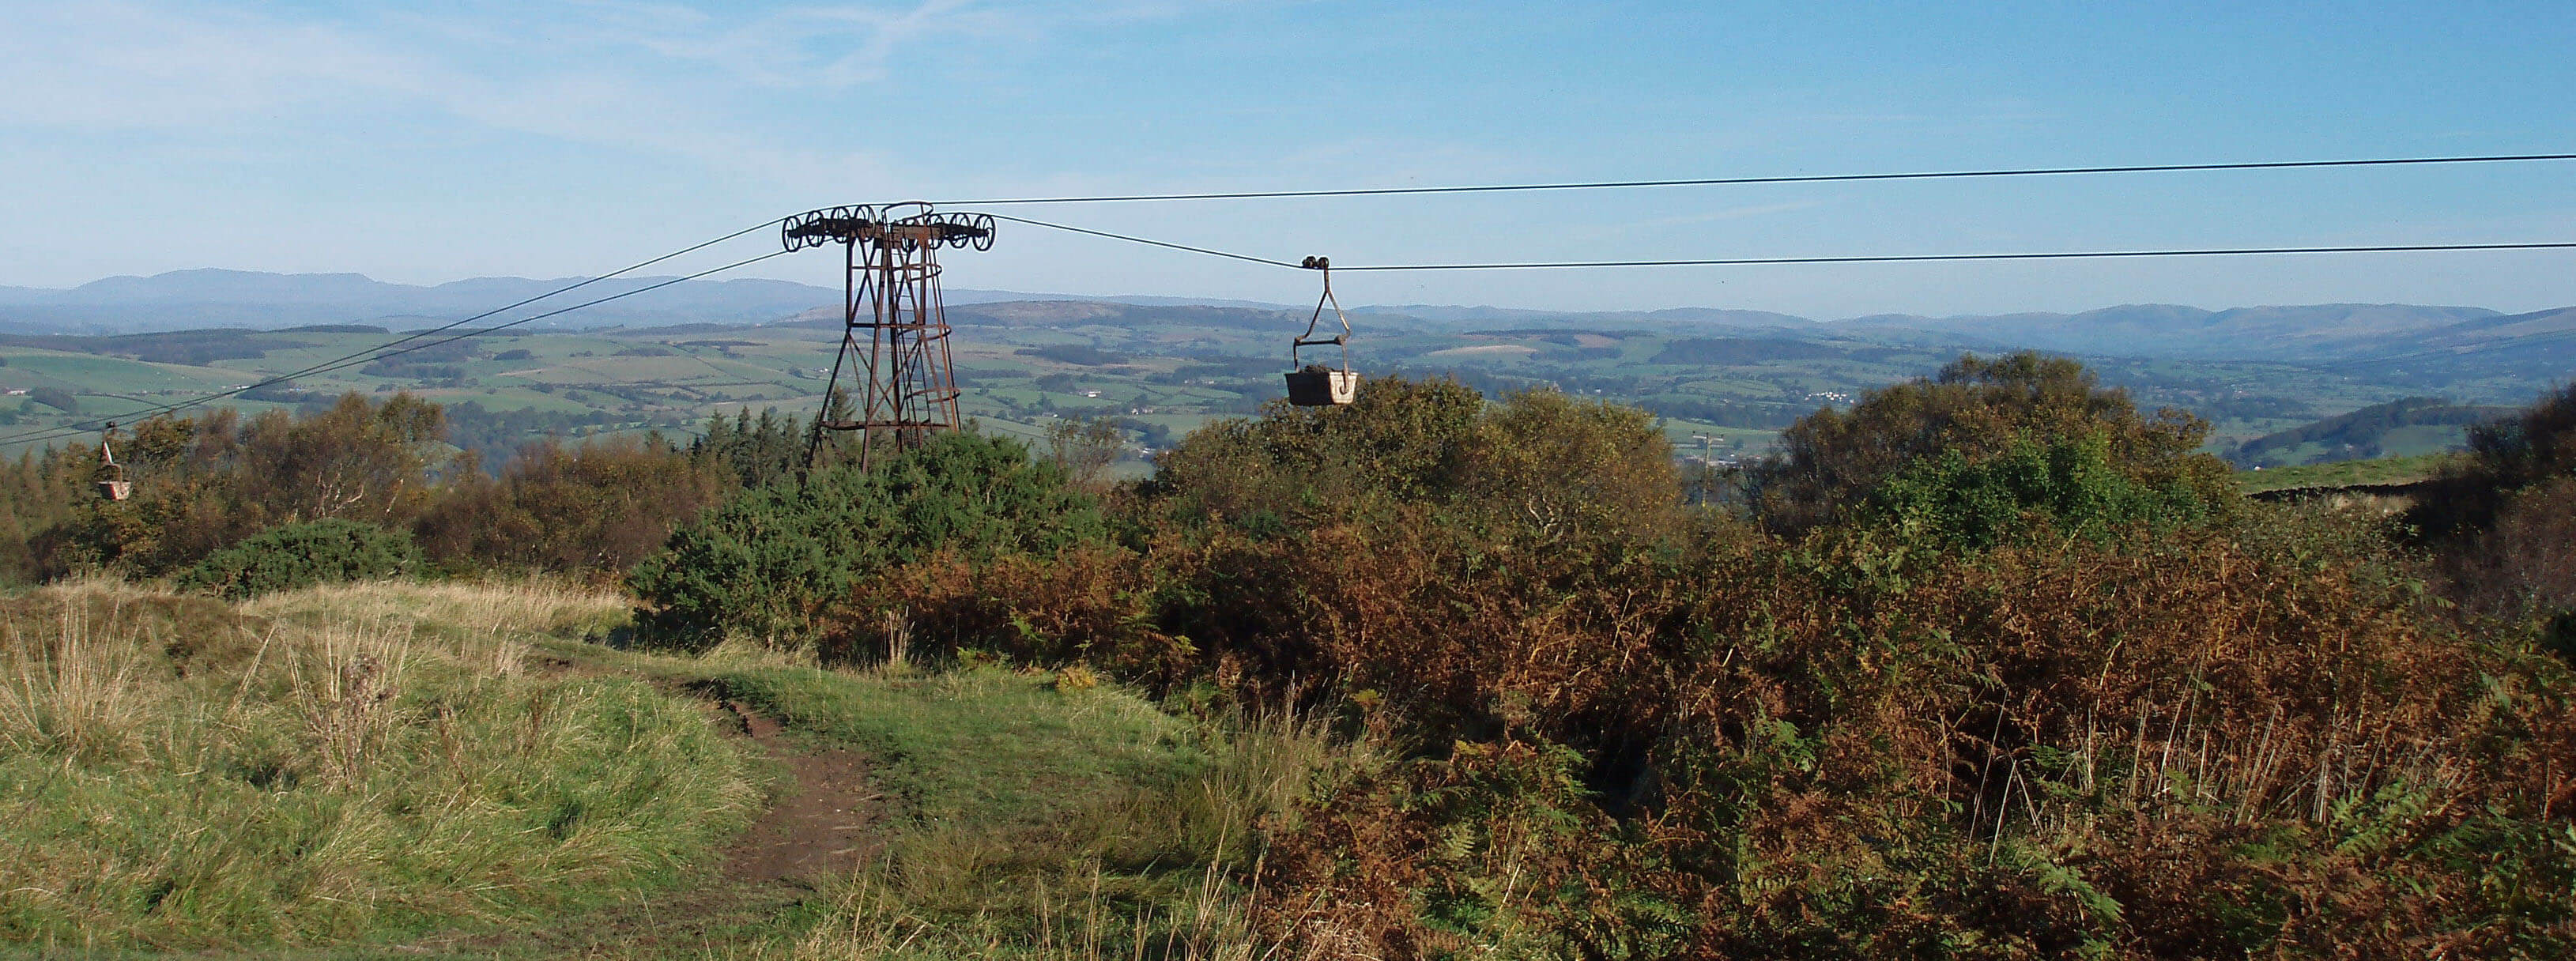 The Claughton ropeway